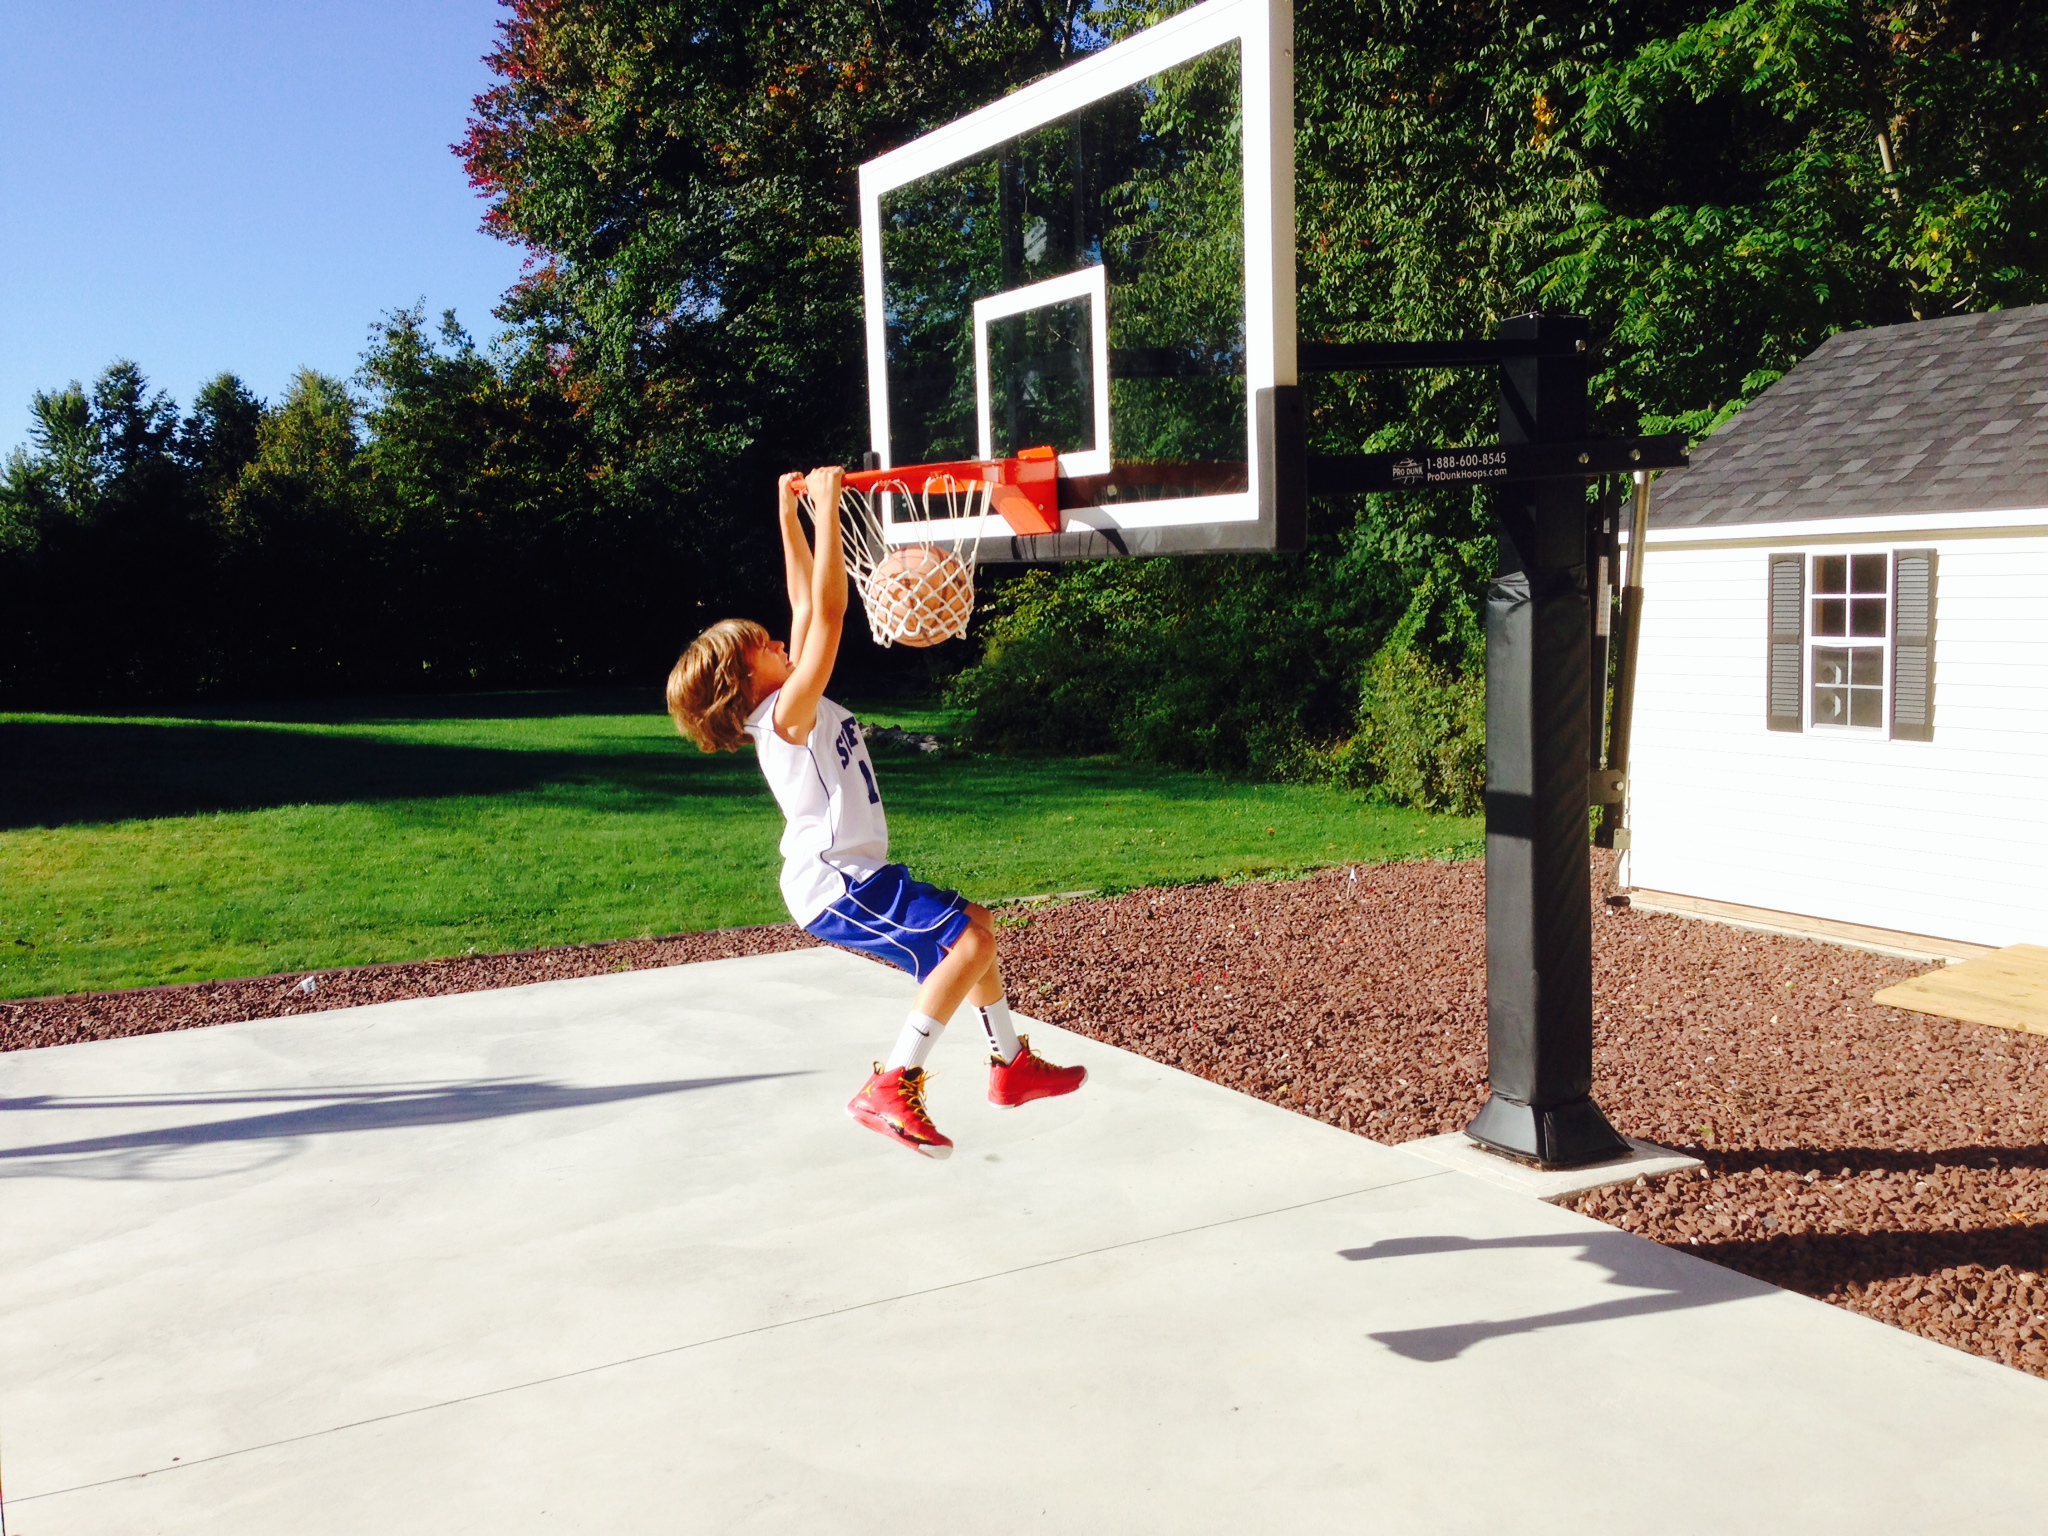 An awesome dunk at the basket by a young boy!